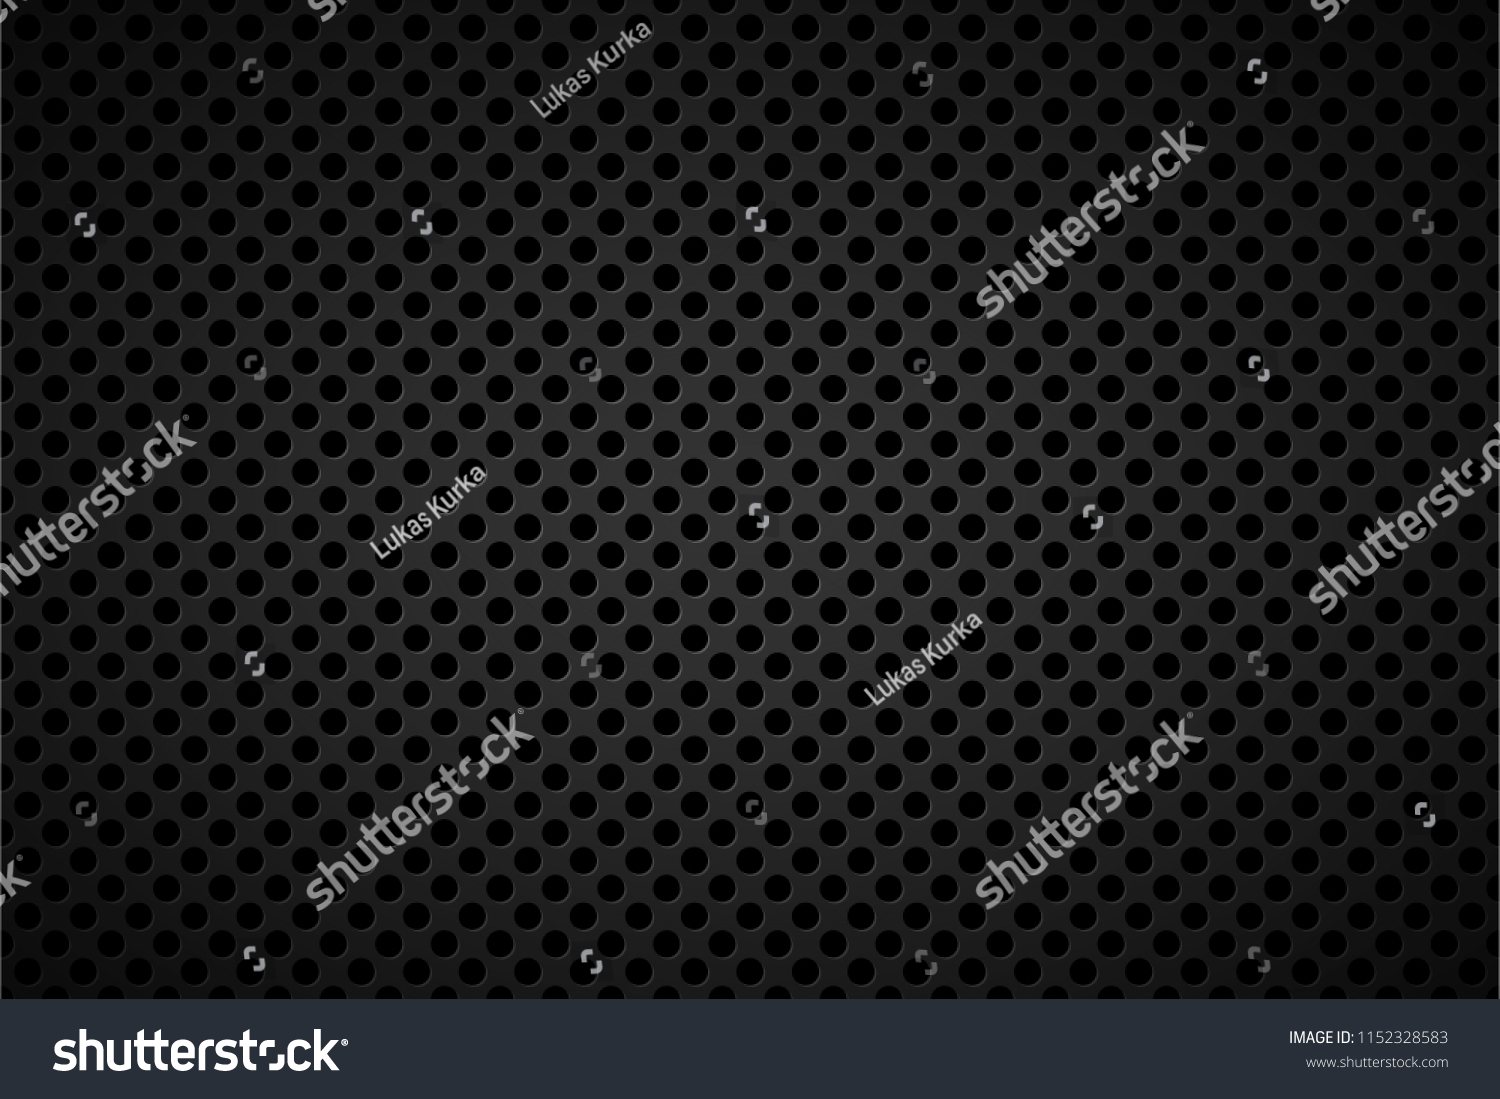 SVG of Perforated black metallic background, abstract background vector illustration svg